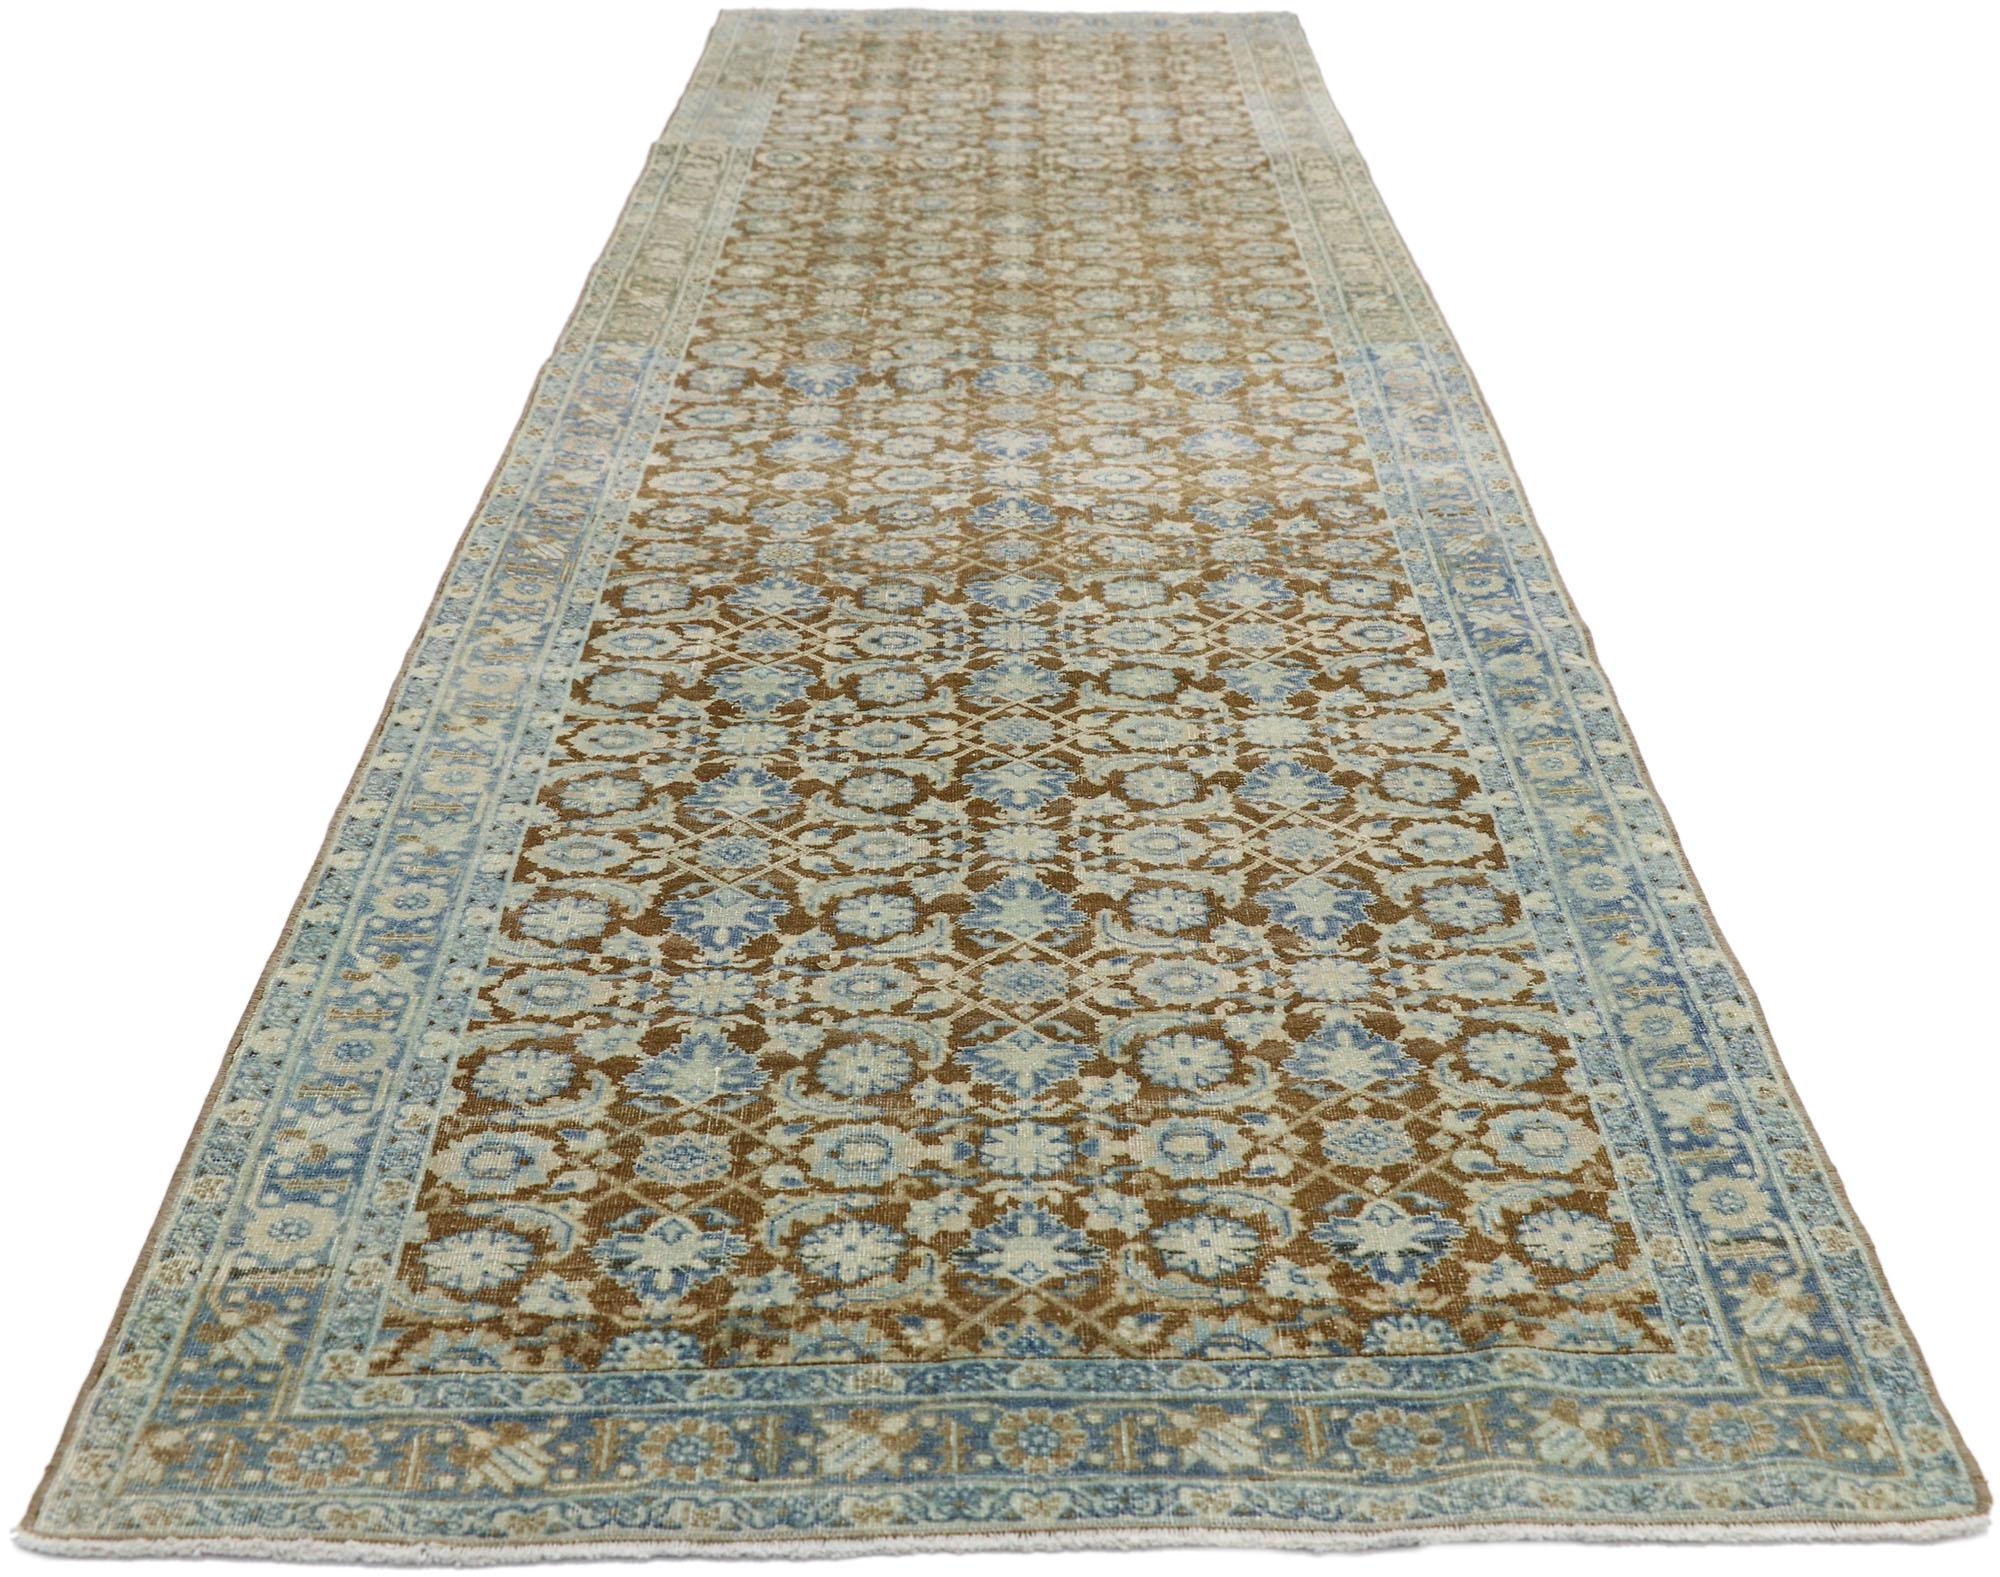 Turkish Distressed Antique Persian Tabriz Style Runner with Gustavian Style